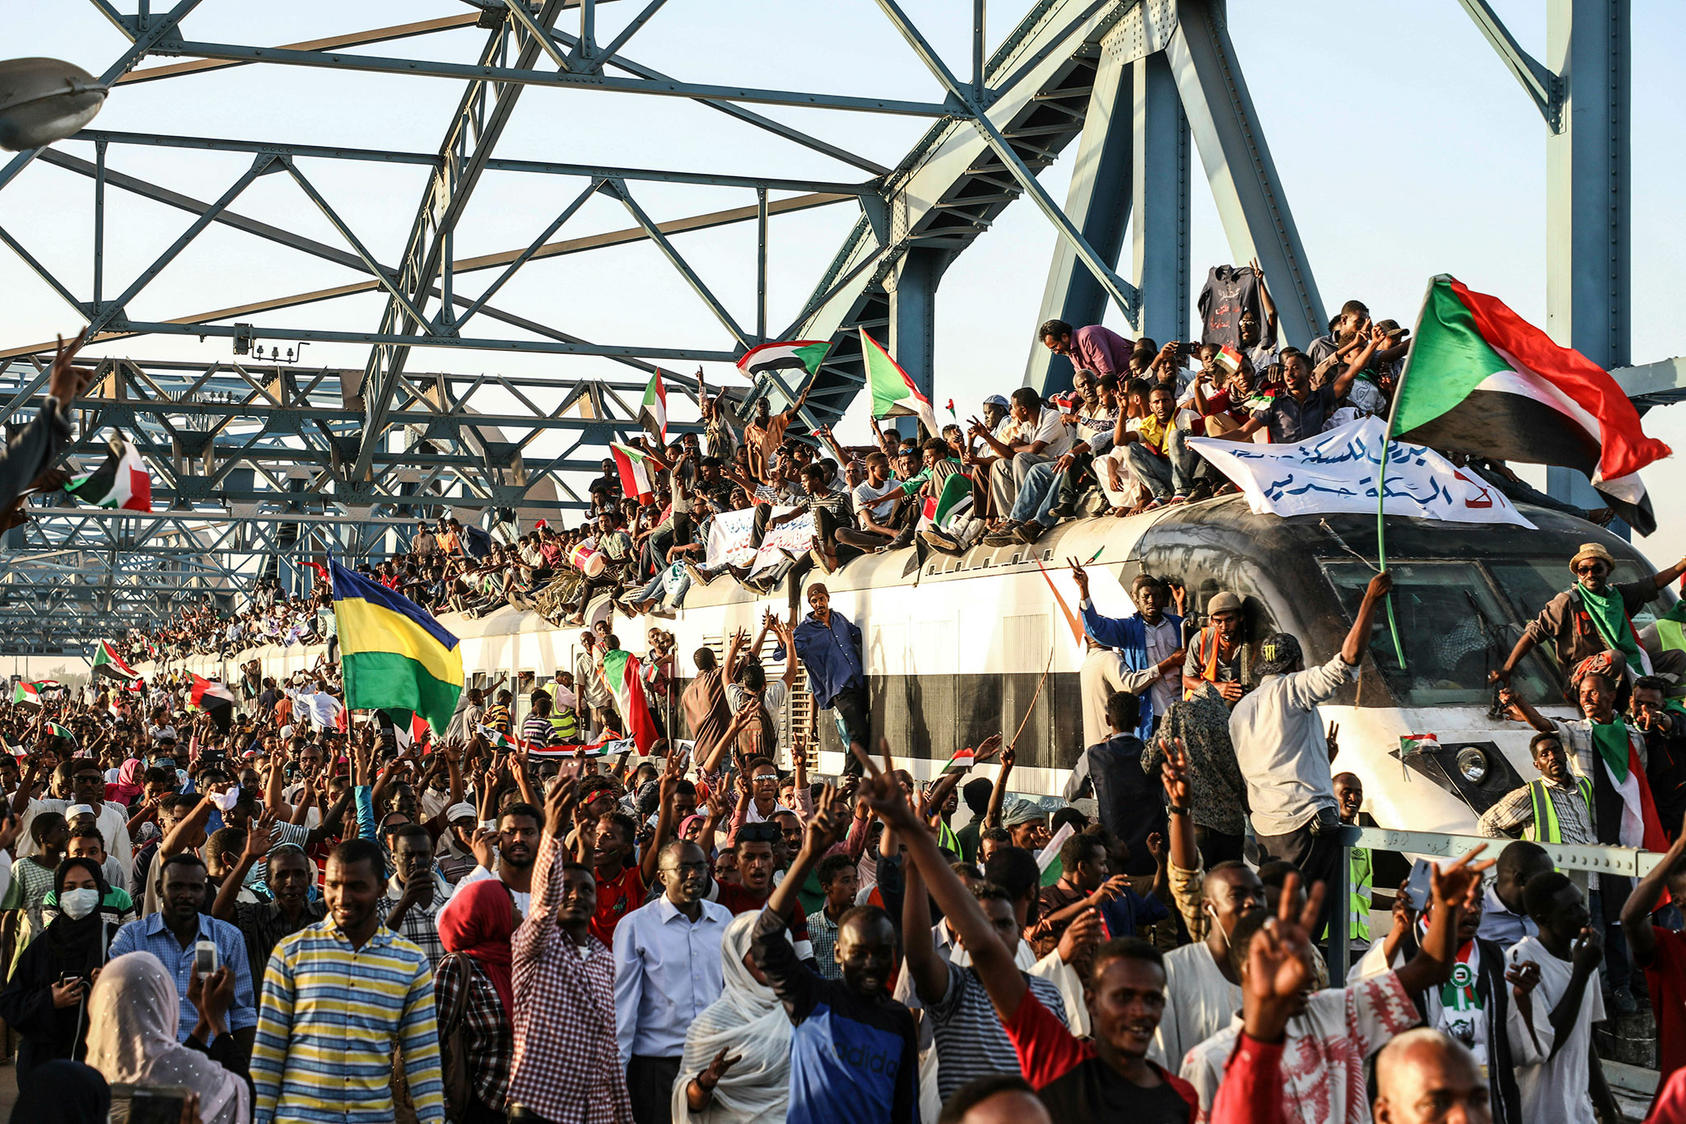 People crowd a train in Khartoum, Sudan, on April 23, 2019, during nationwide protests after the overthrow of President Omar al-Bashir earlier that month. (Photo by AP)